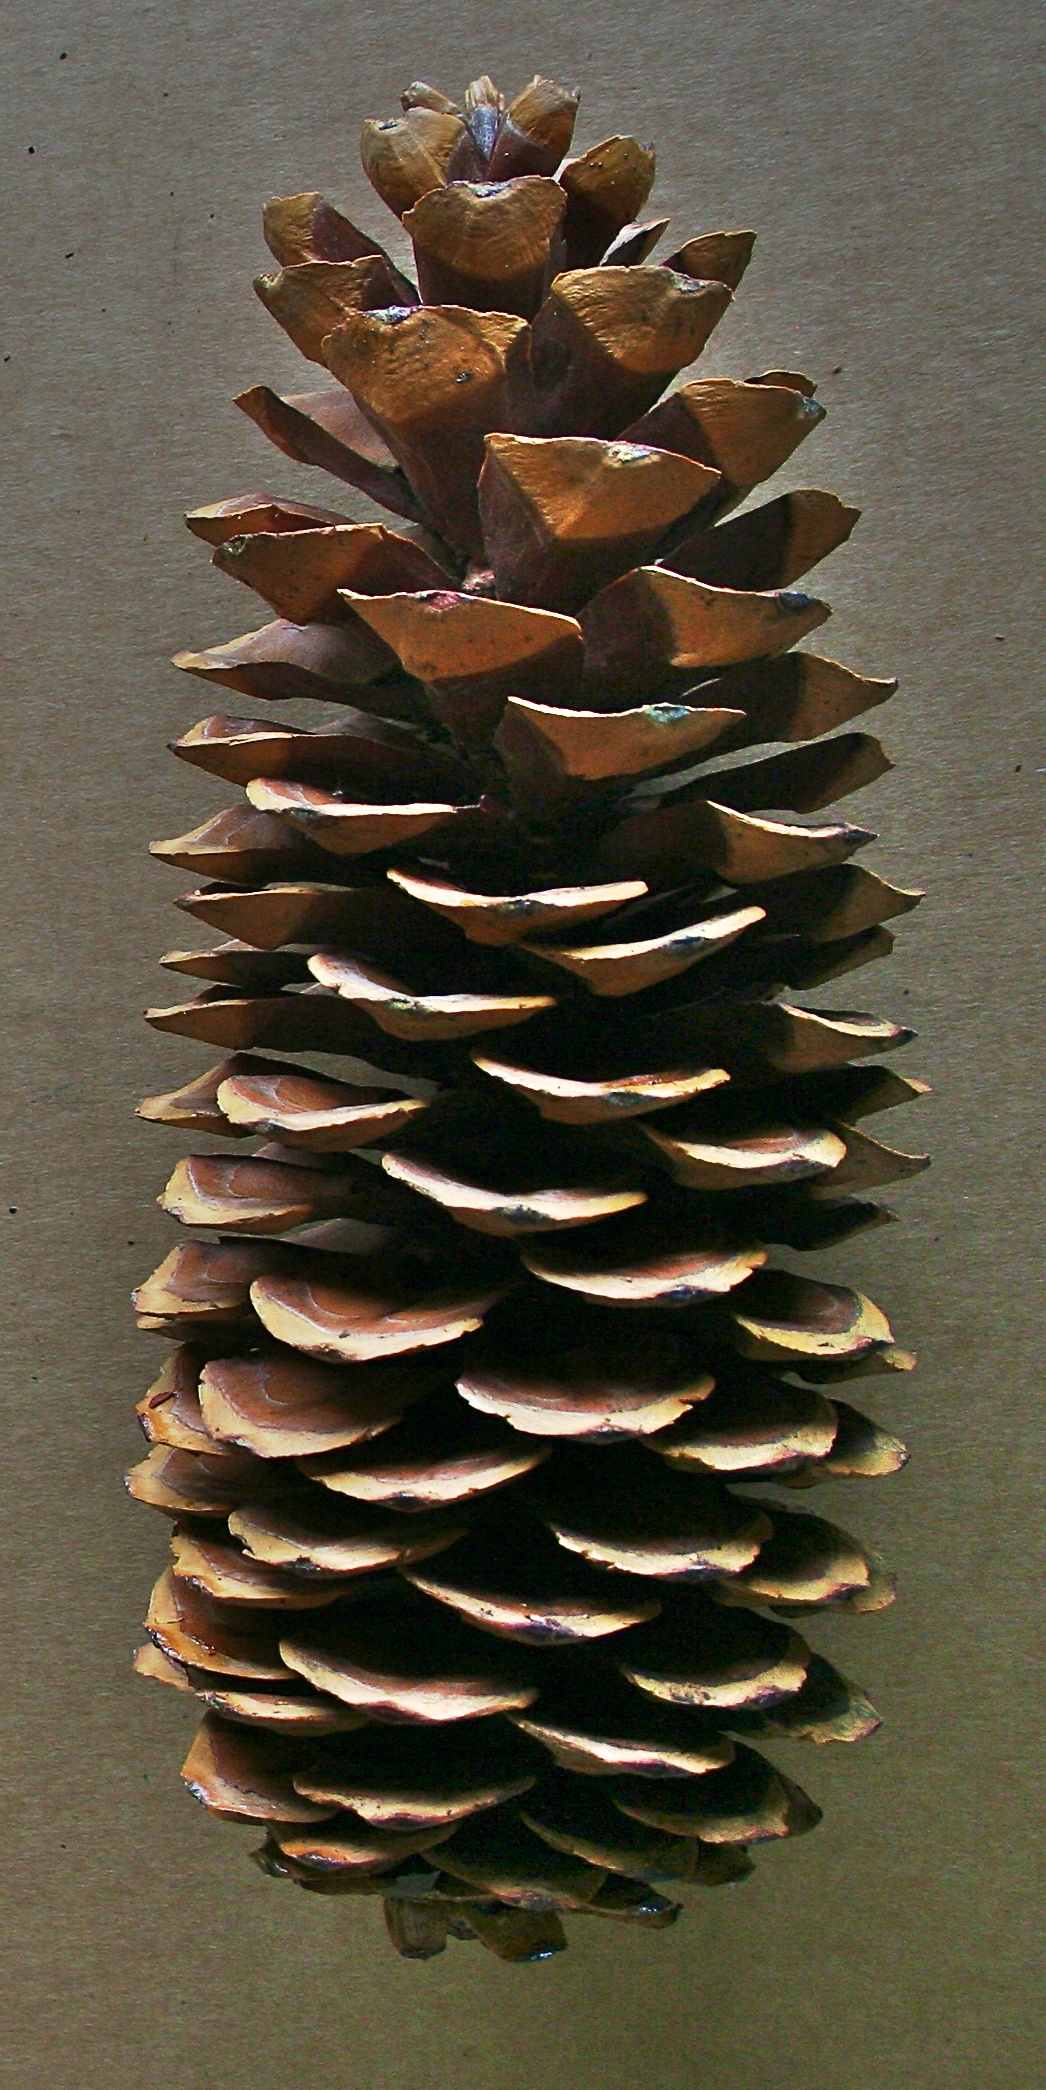 Oregon Holiday Products scented and craft pine cones - Sugar Pine Cones